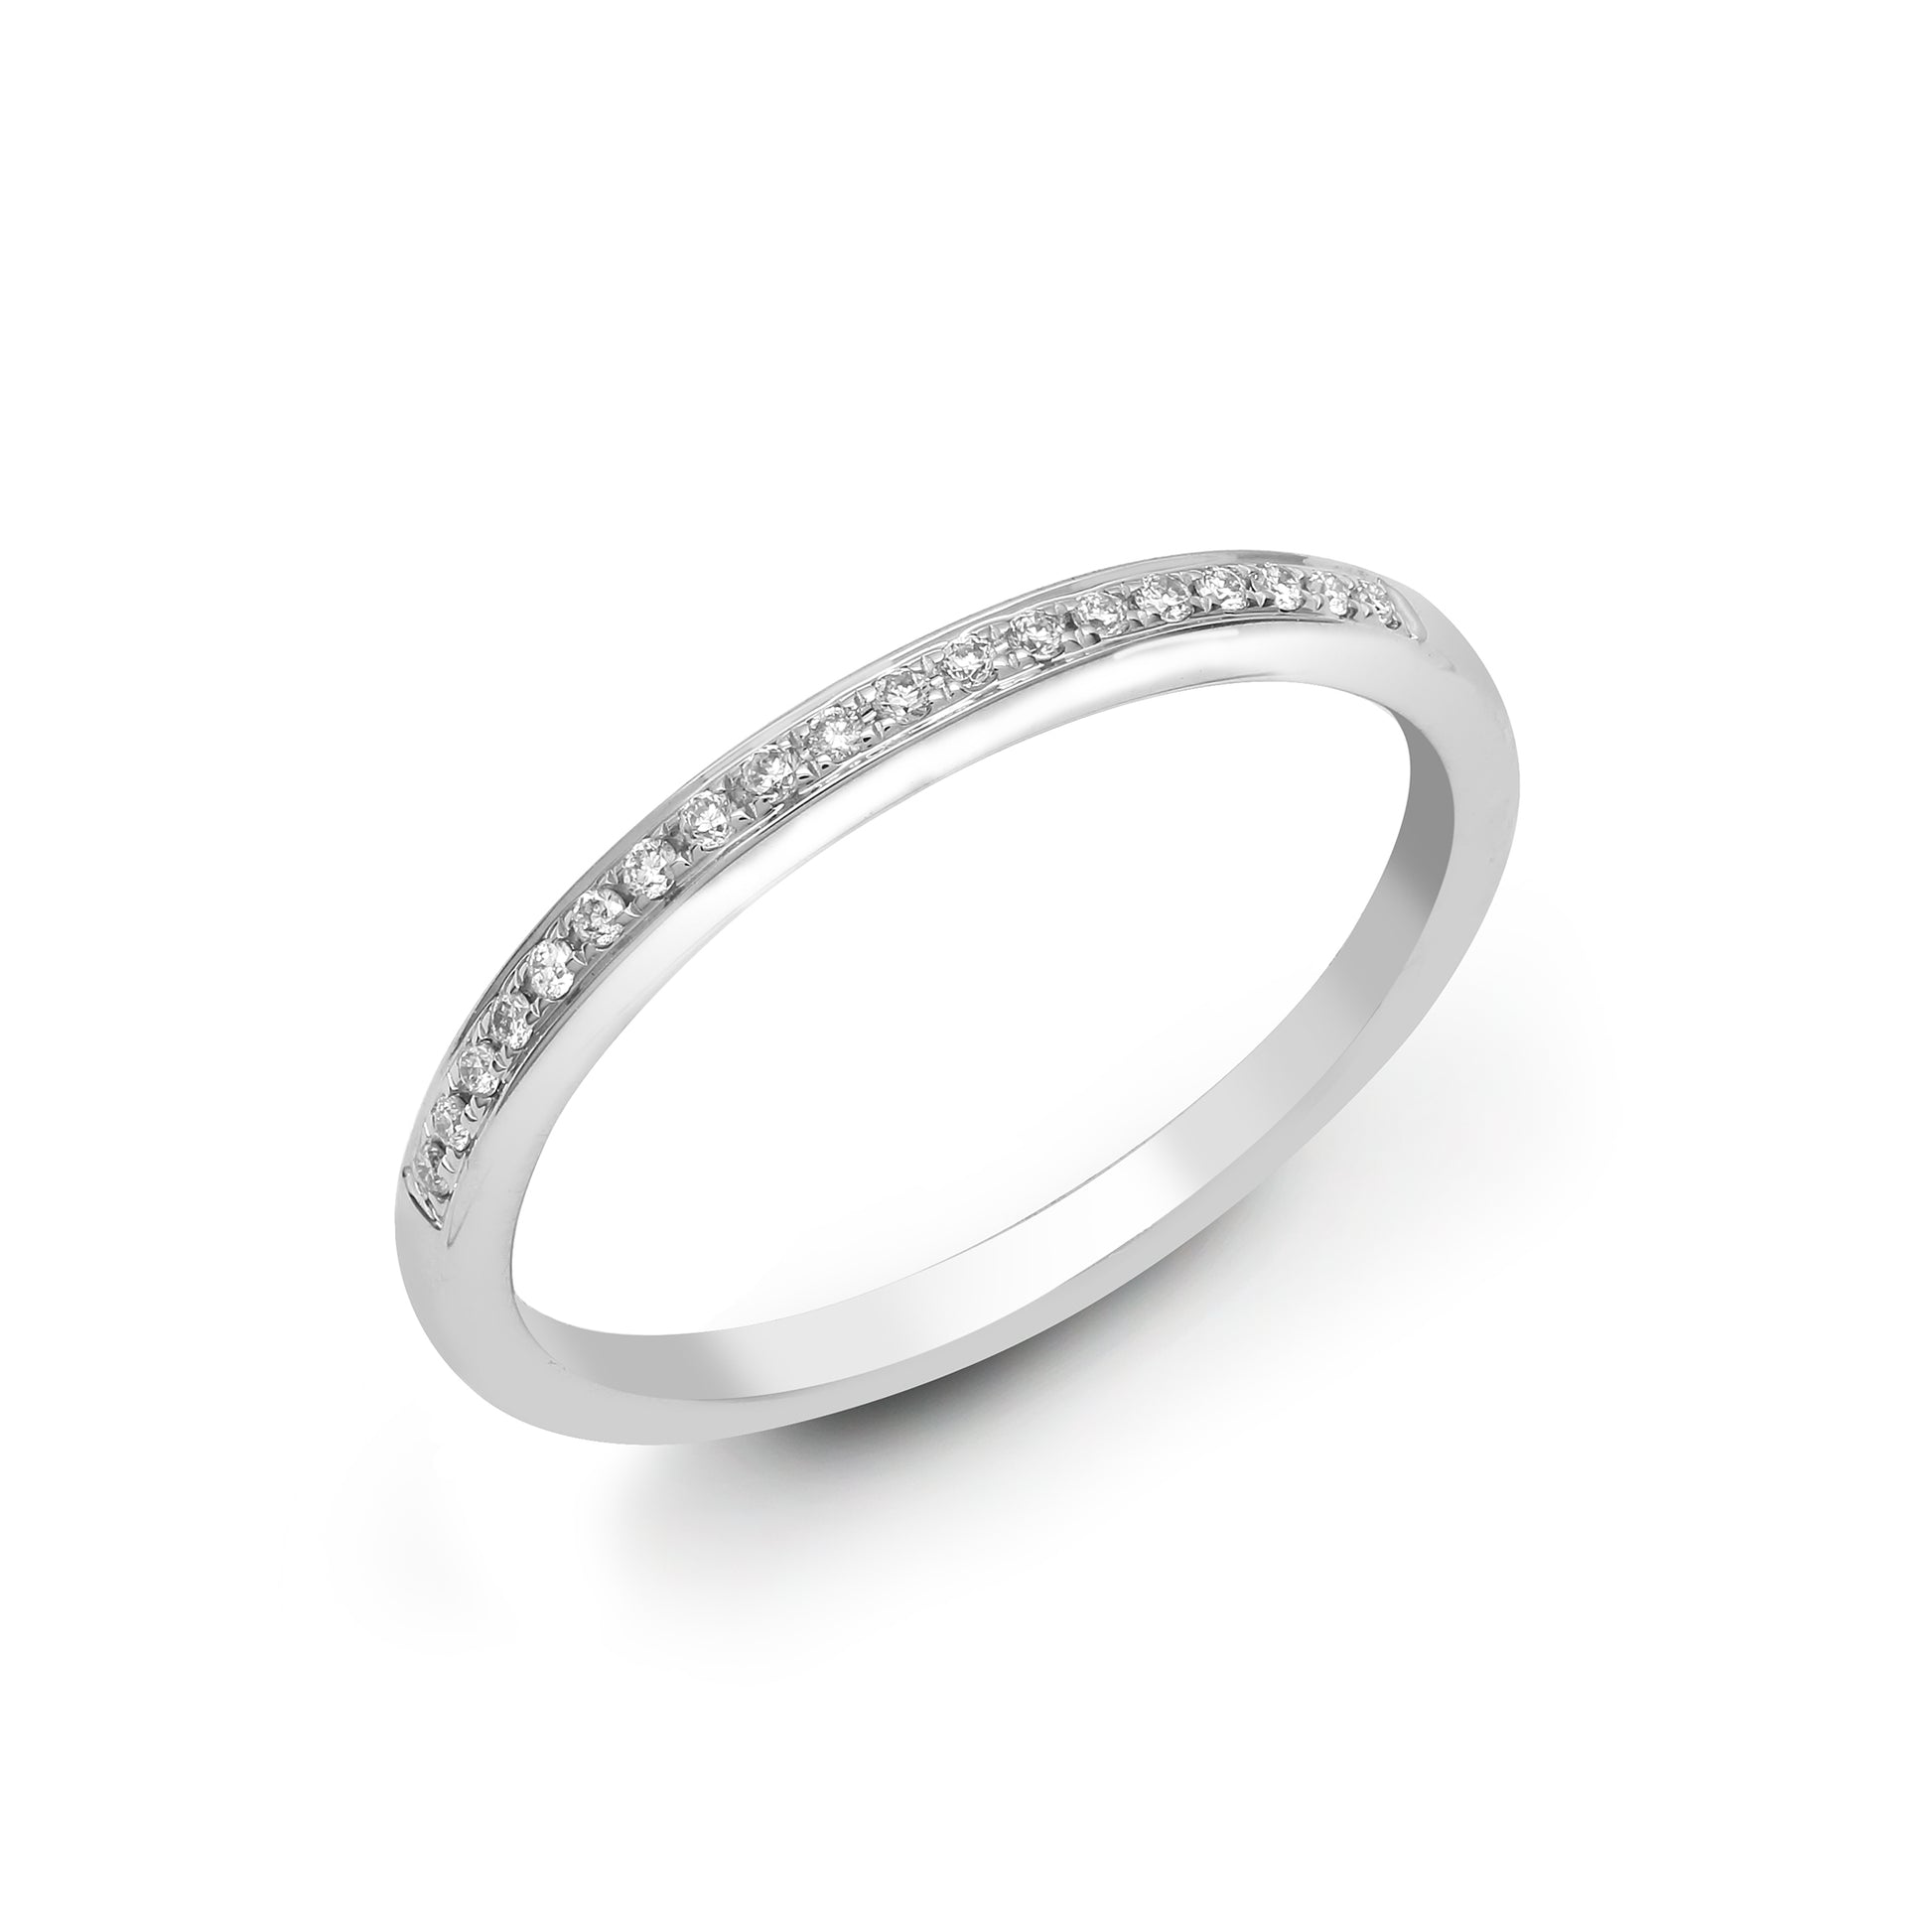 18ct White Gold  0.35ct Diamond Dainty Band Eternity Ring 2.5mm - 18R532-035